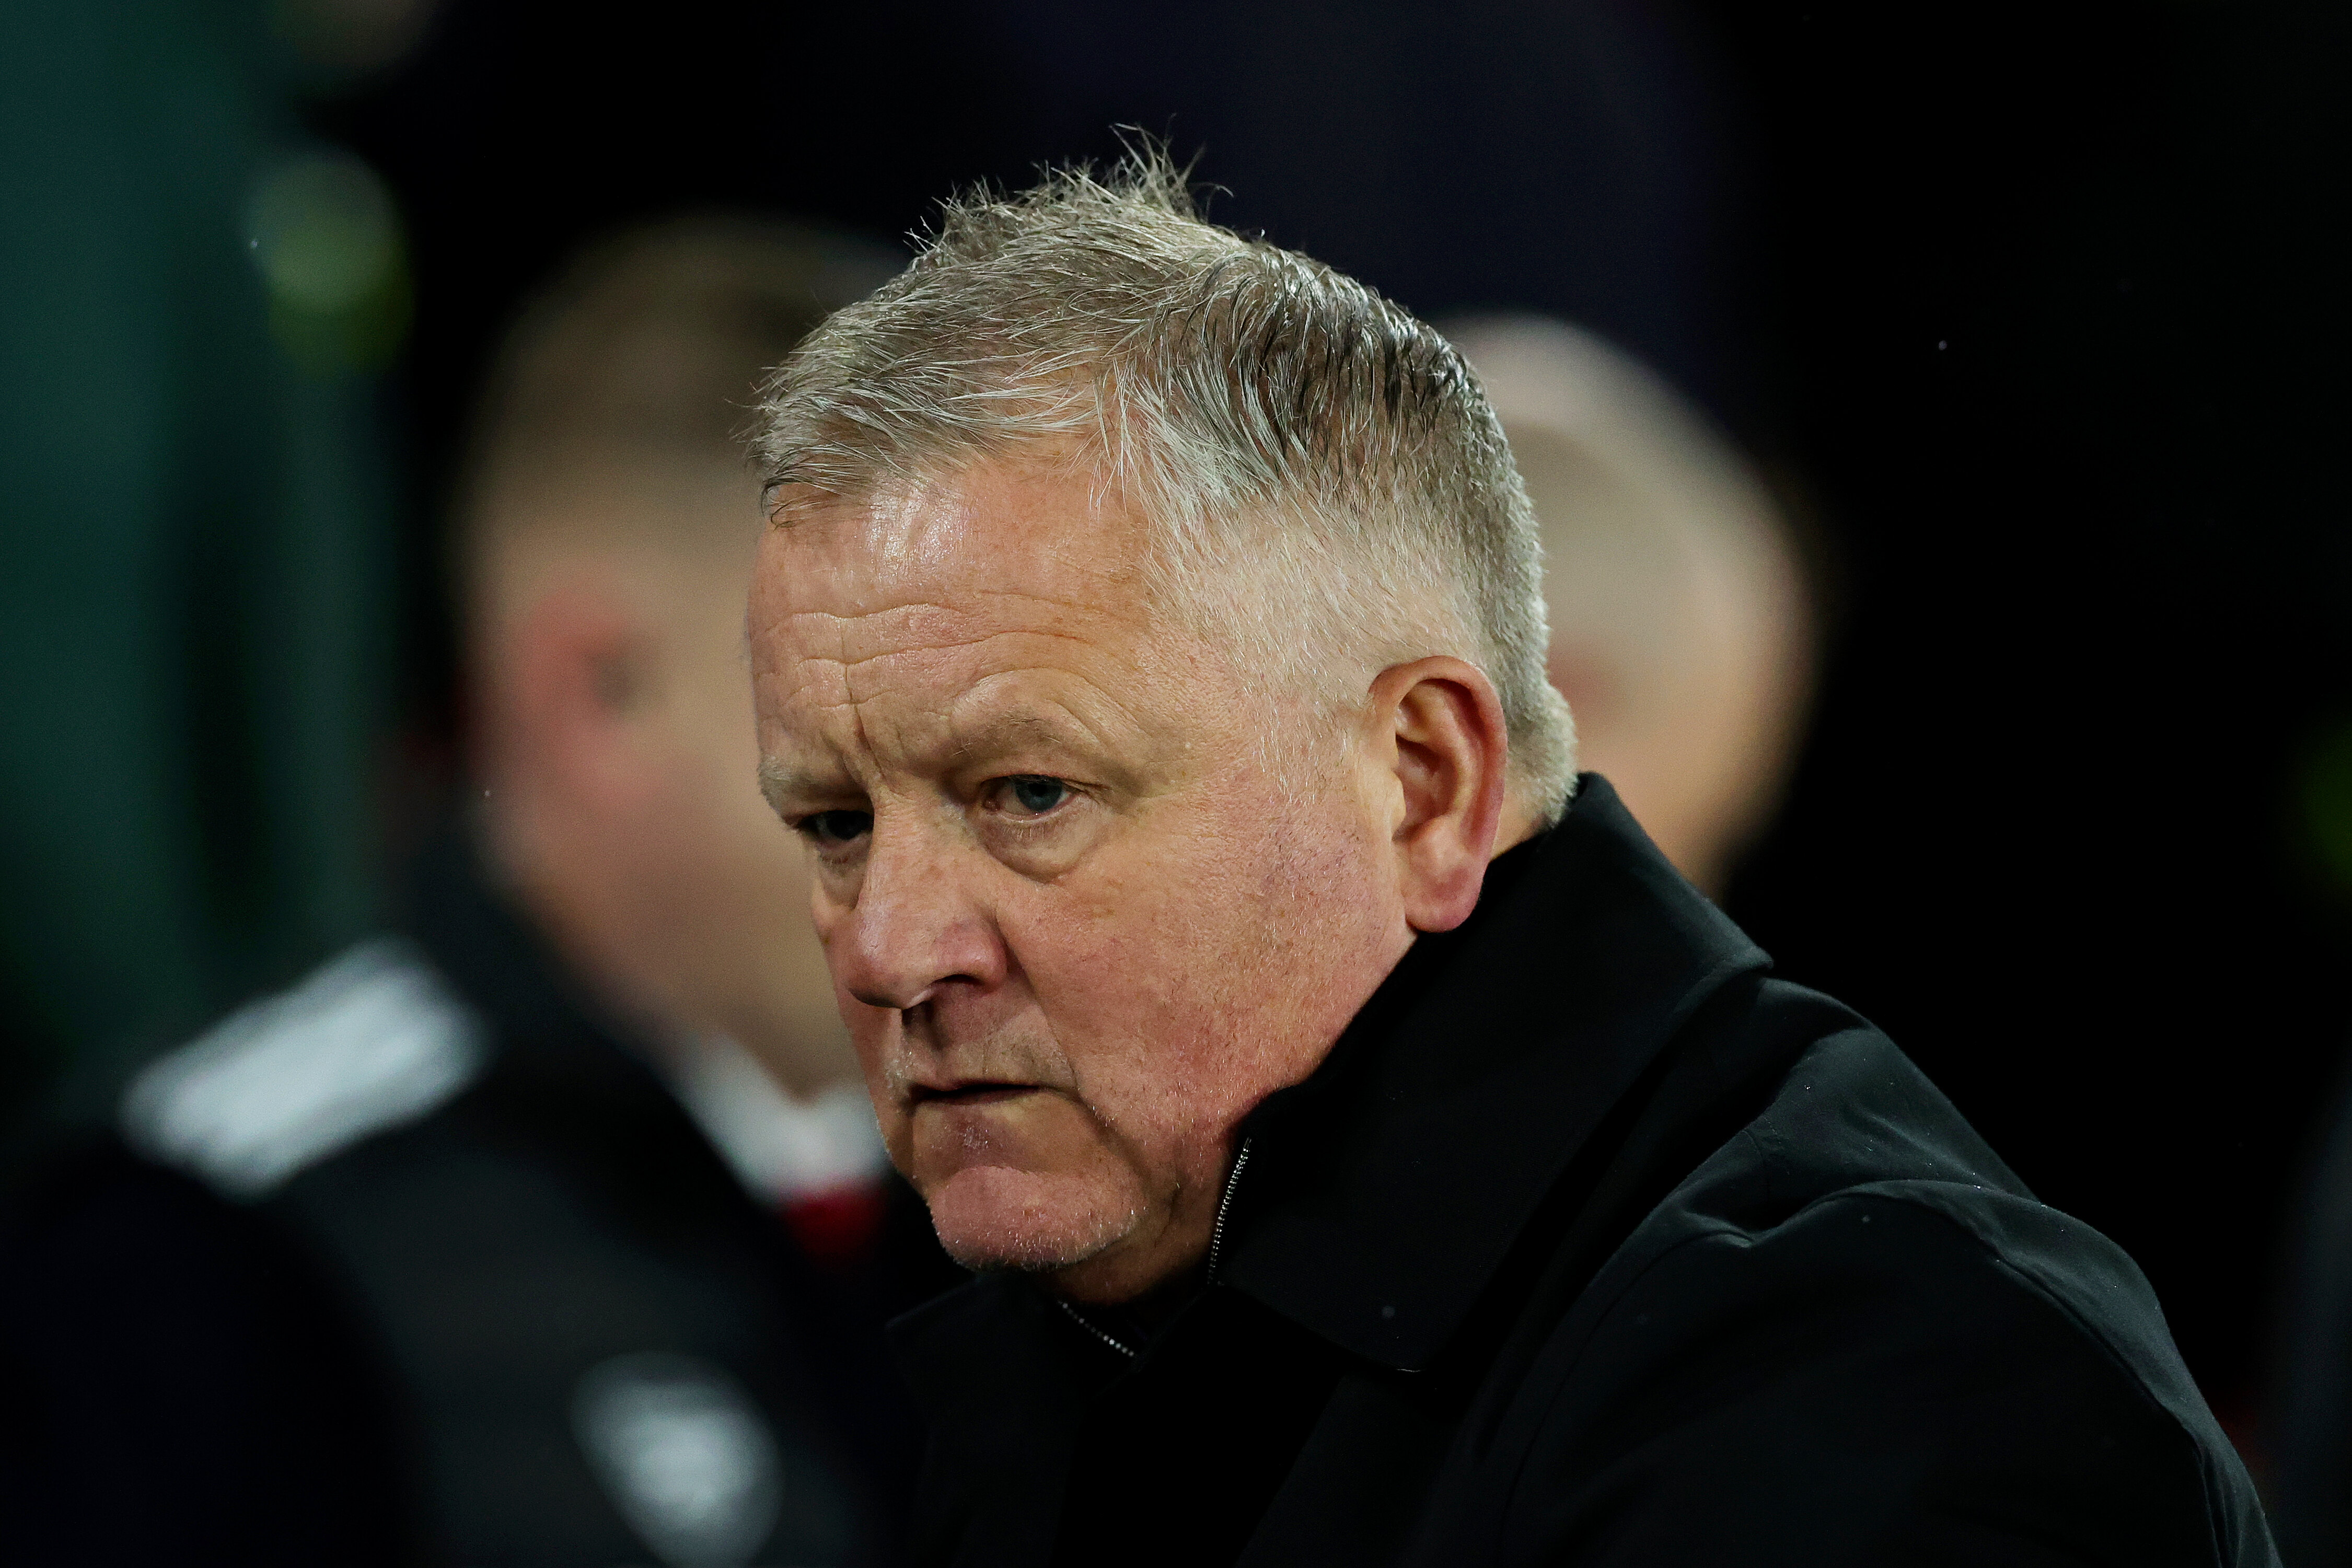 The future of Sheffield United is bright thanks to Chris Wilder and Blades owner Prince Abdullah